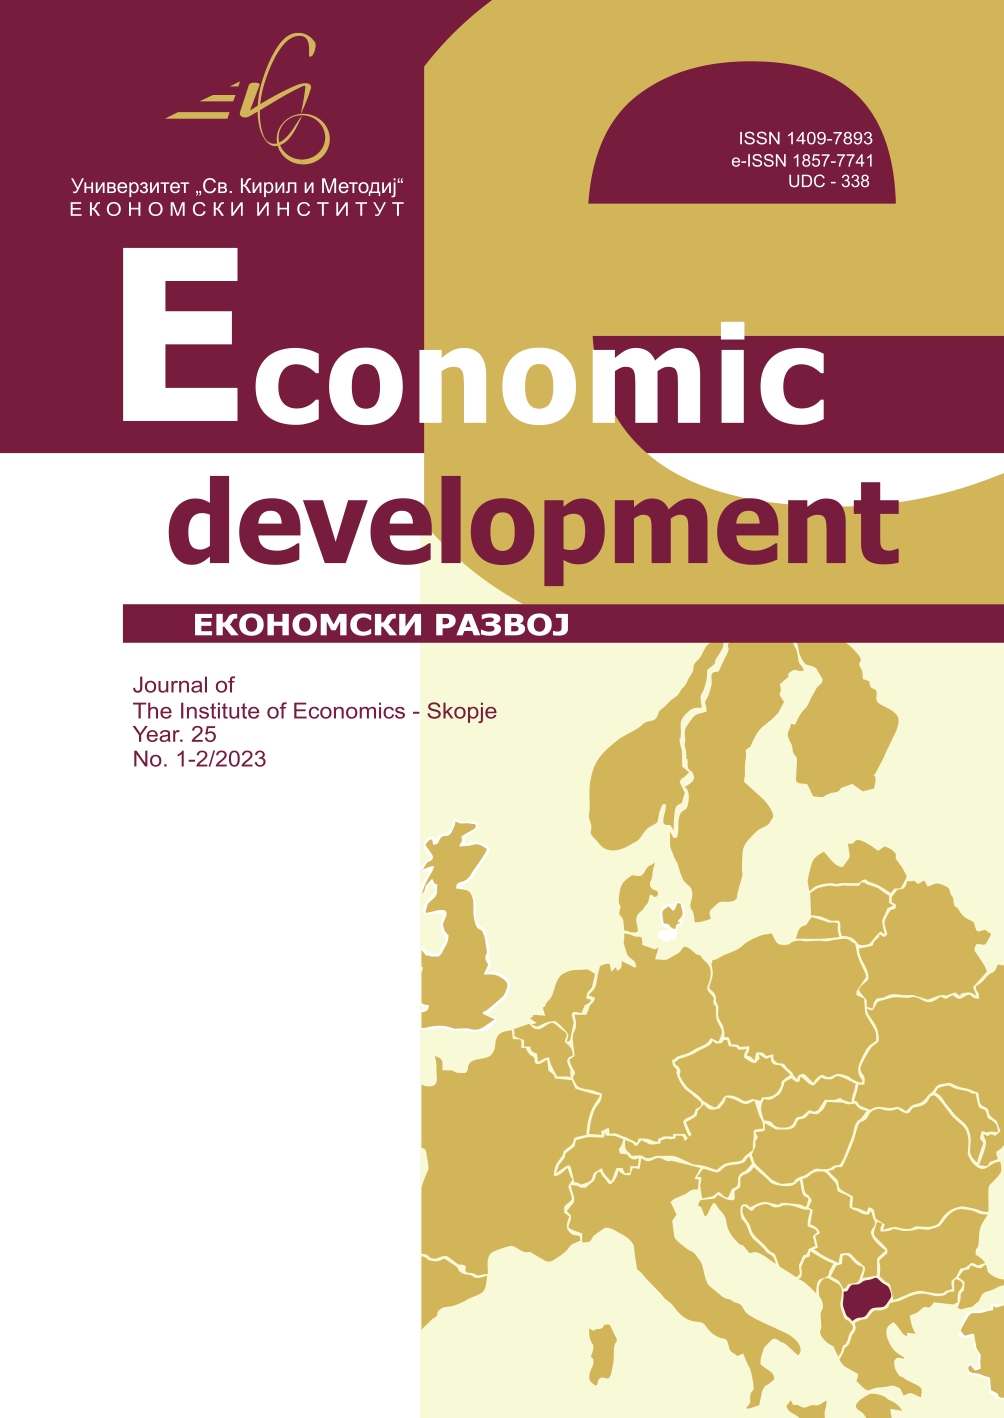 QUANTITATIVE ANALYSIS OF THE IMPACT OF THE FINANCIAL MARKET ON THE ECONOMIC GROWTH